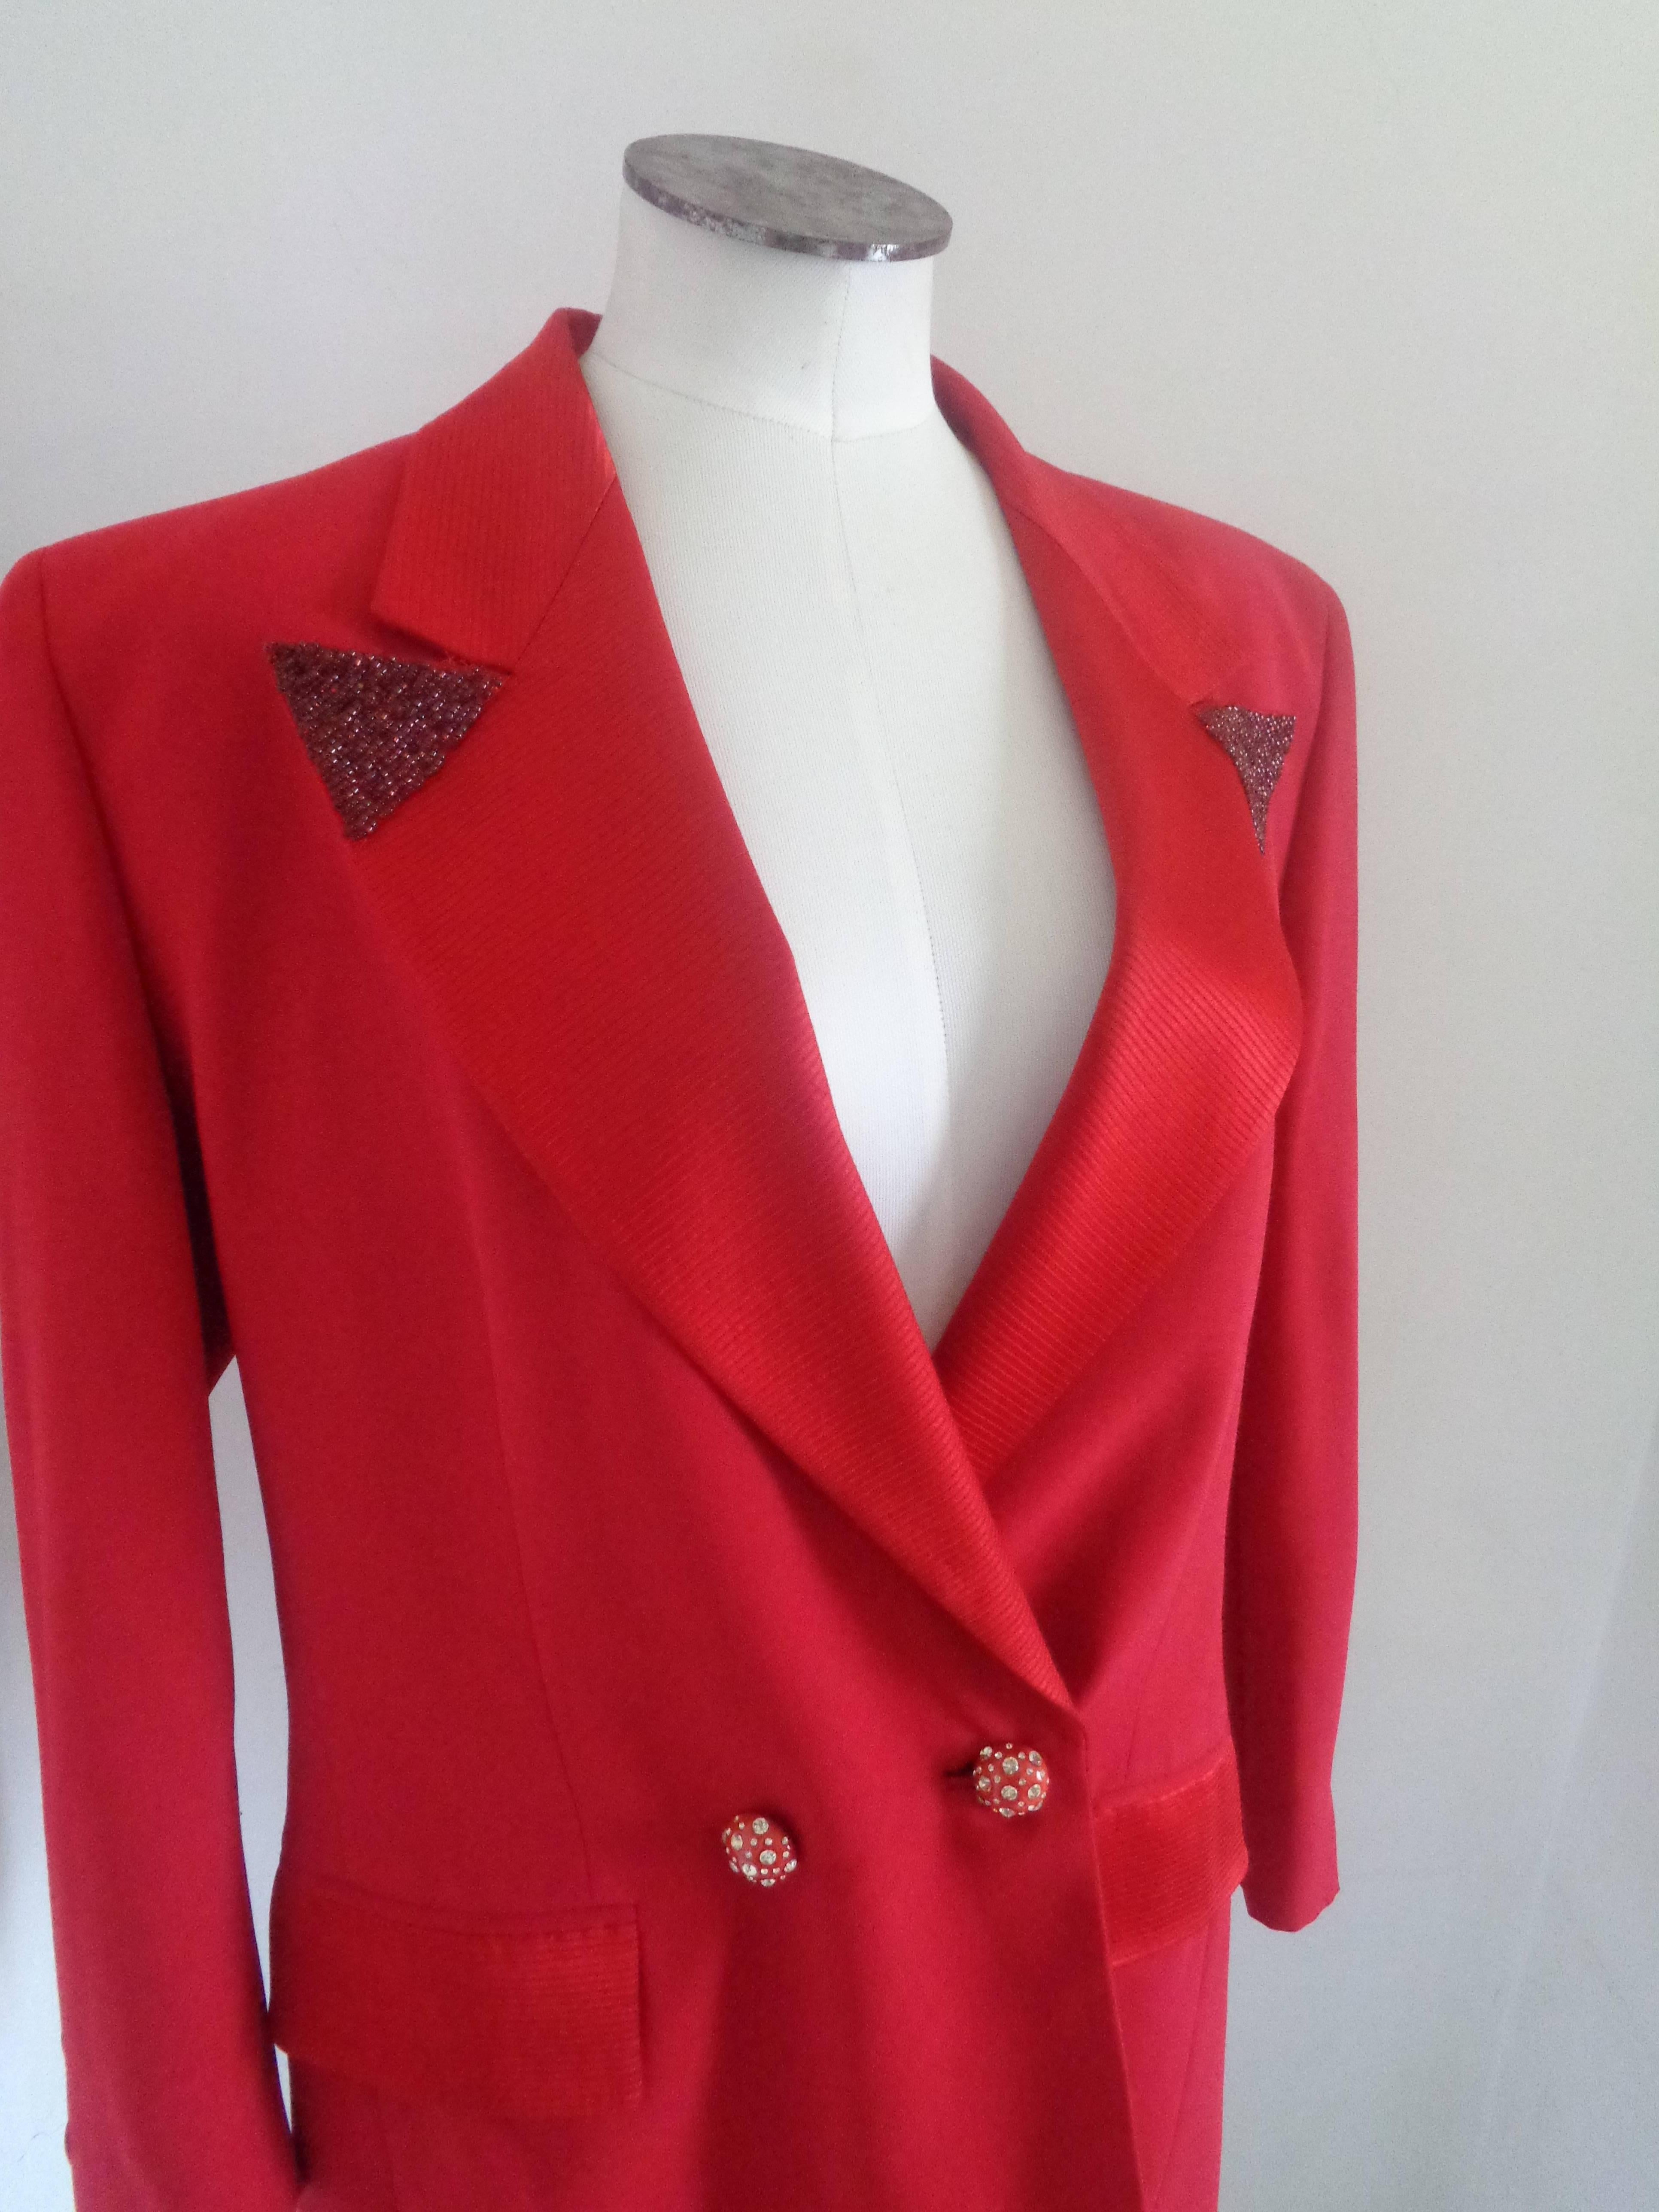 Marta Palmieri Red Jacket
totally made in italy in italian size range 46

Composition: Acetat